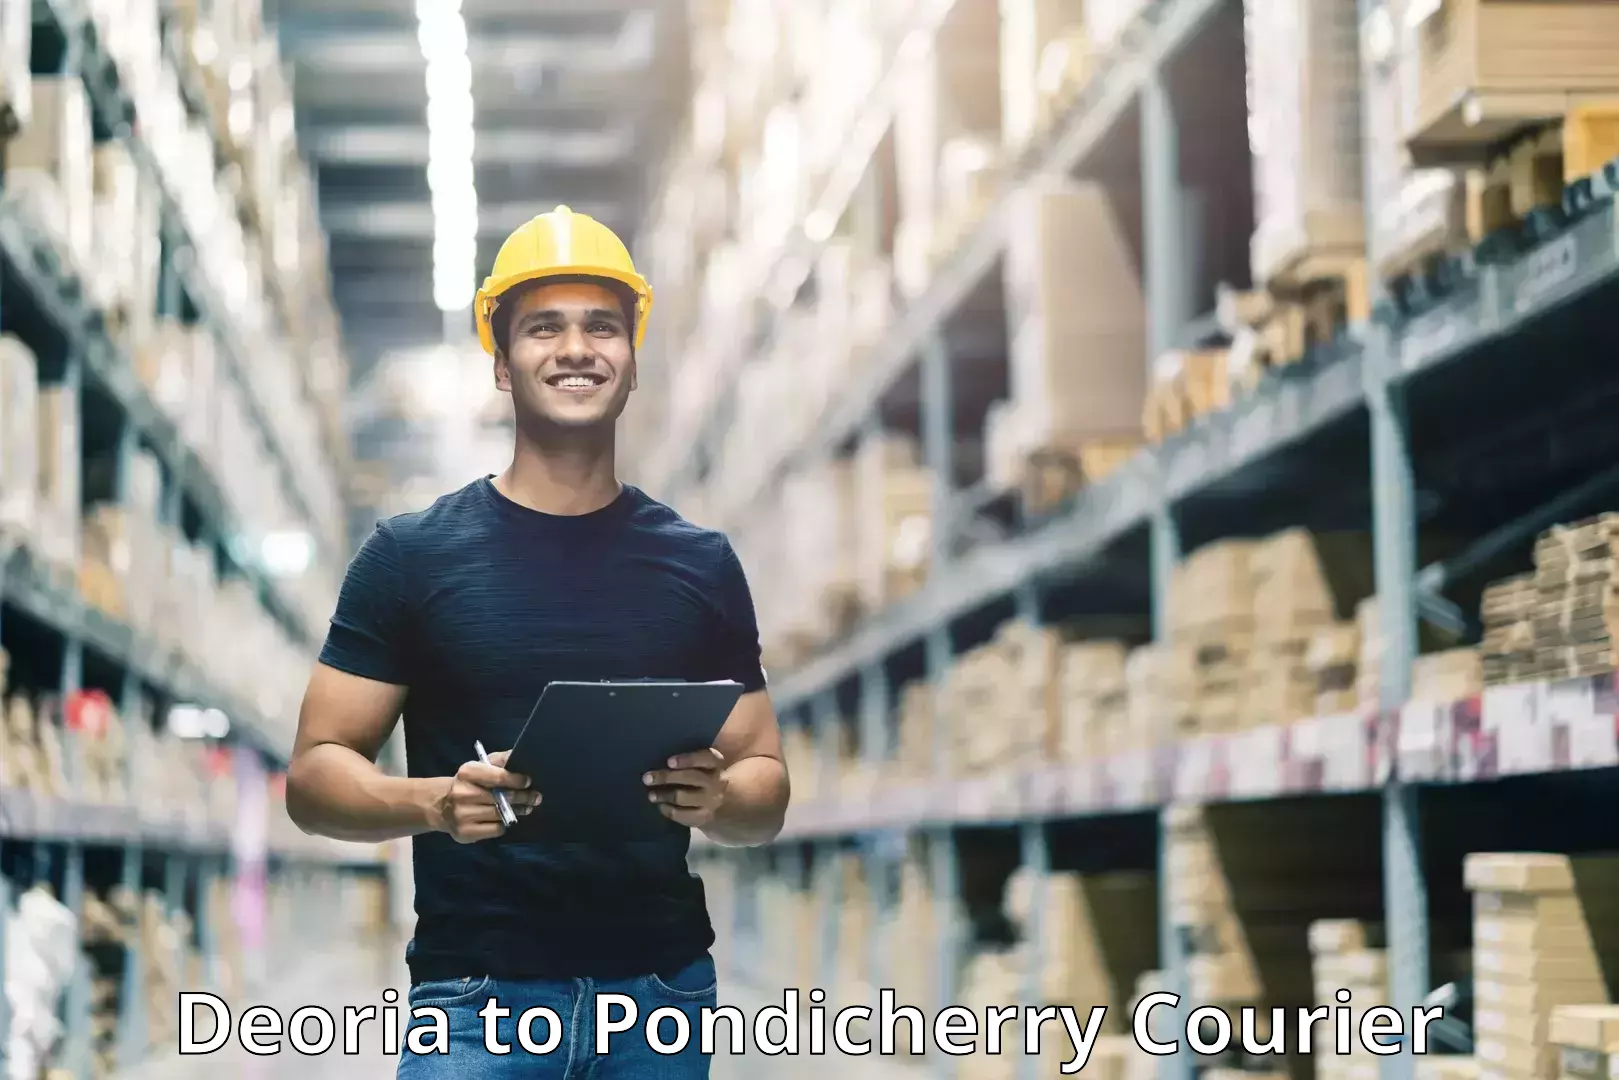 Global courier networks Deoria to Pondicherry